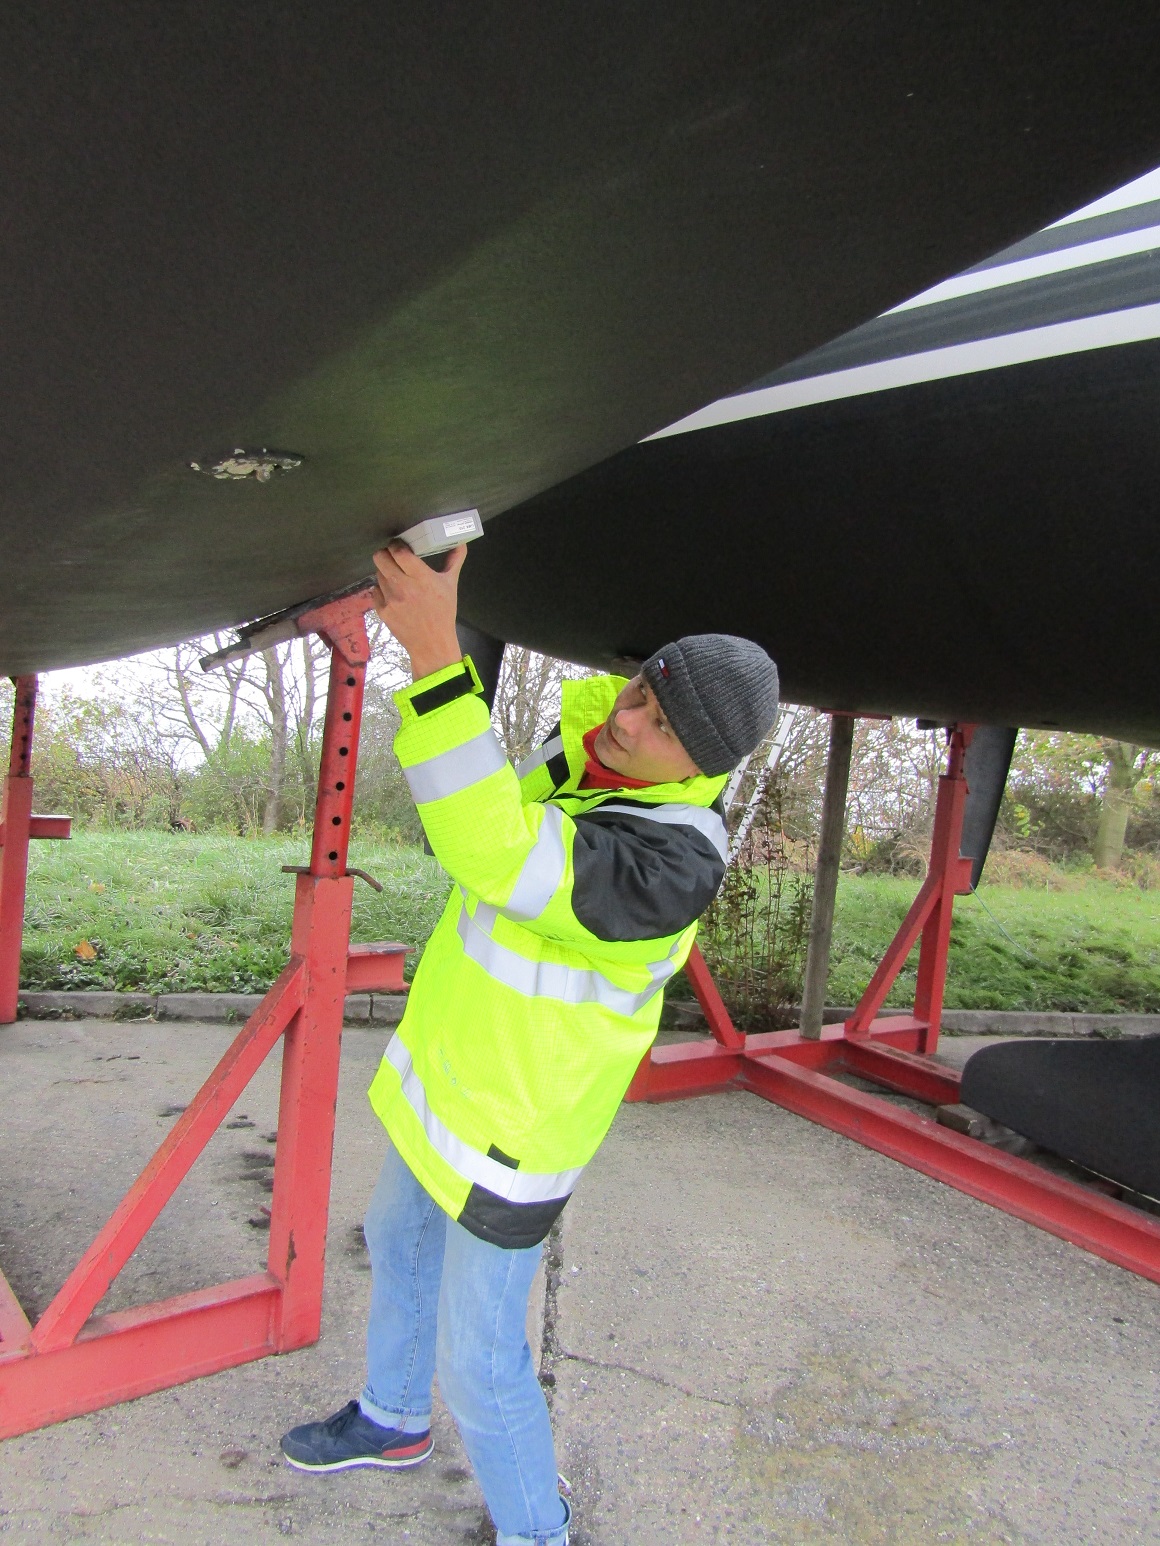 Sven Zapatka during the Osmosis Measurement on a Fiberglass Hull